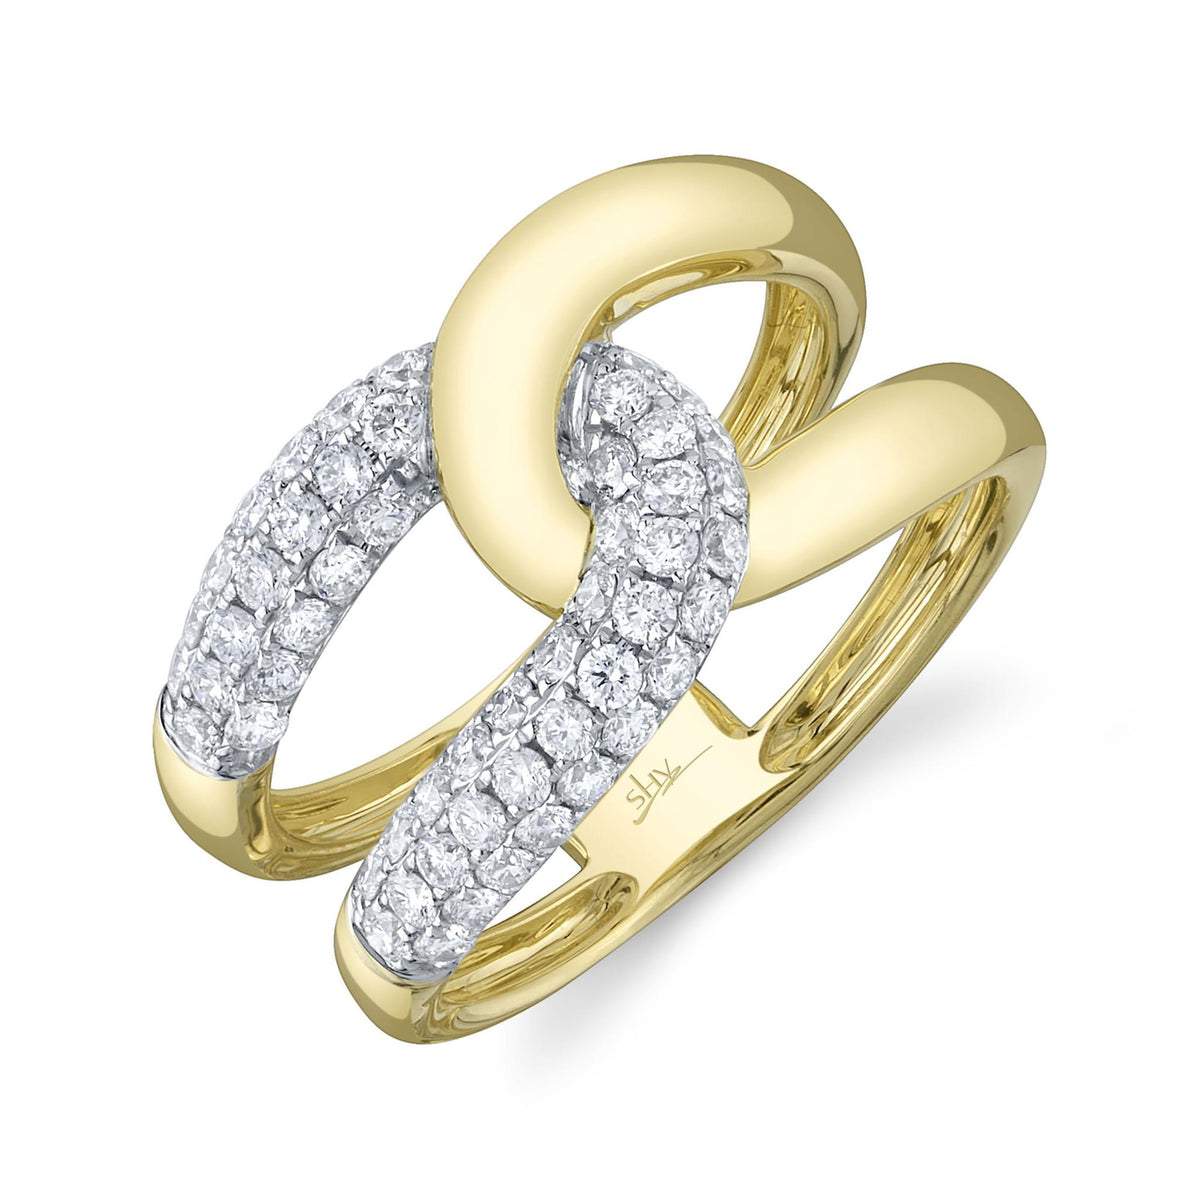 Shy Creation 14K Yellow and White Gold Twist Ring with .70cttw Natural Diamonds